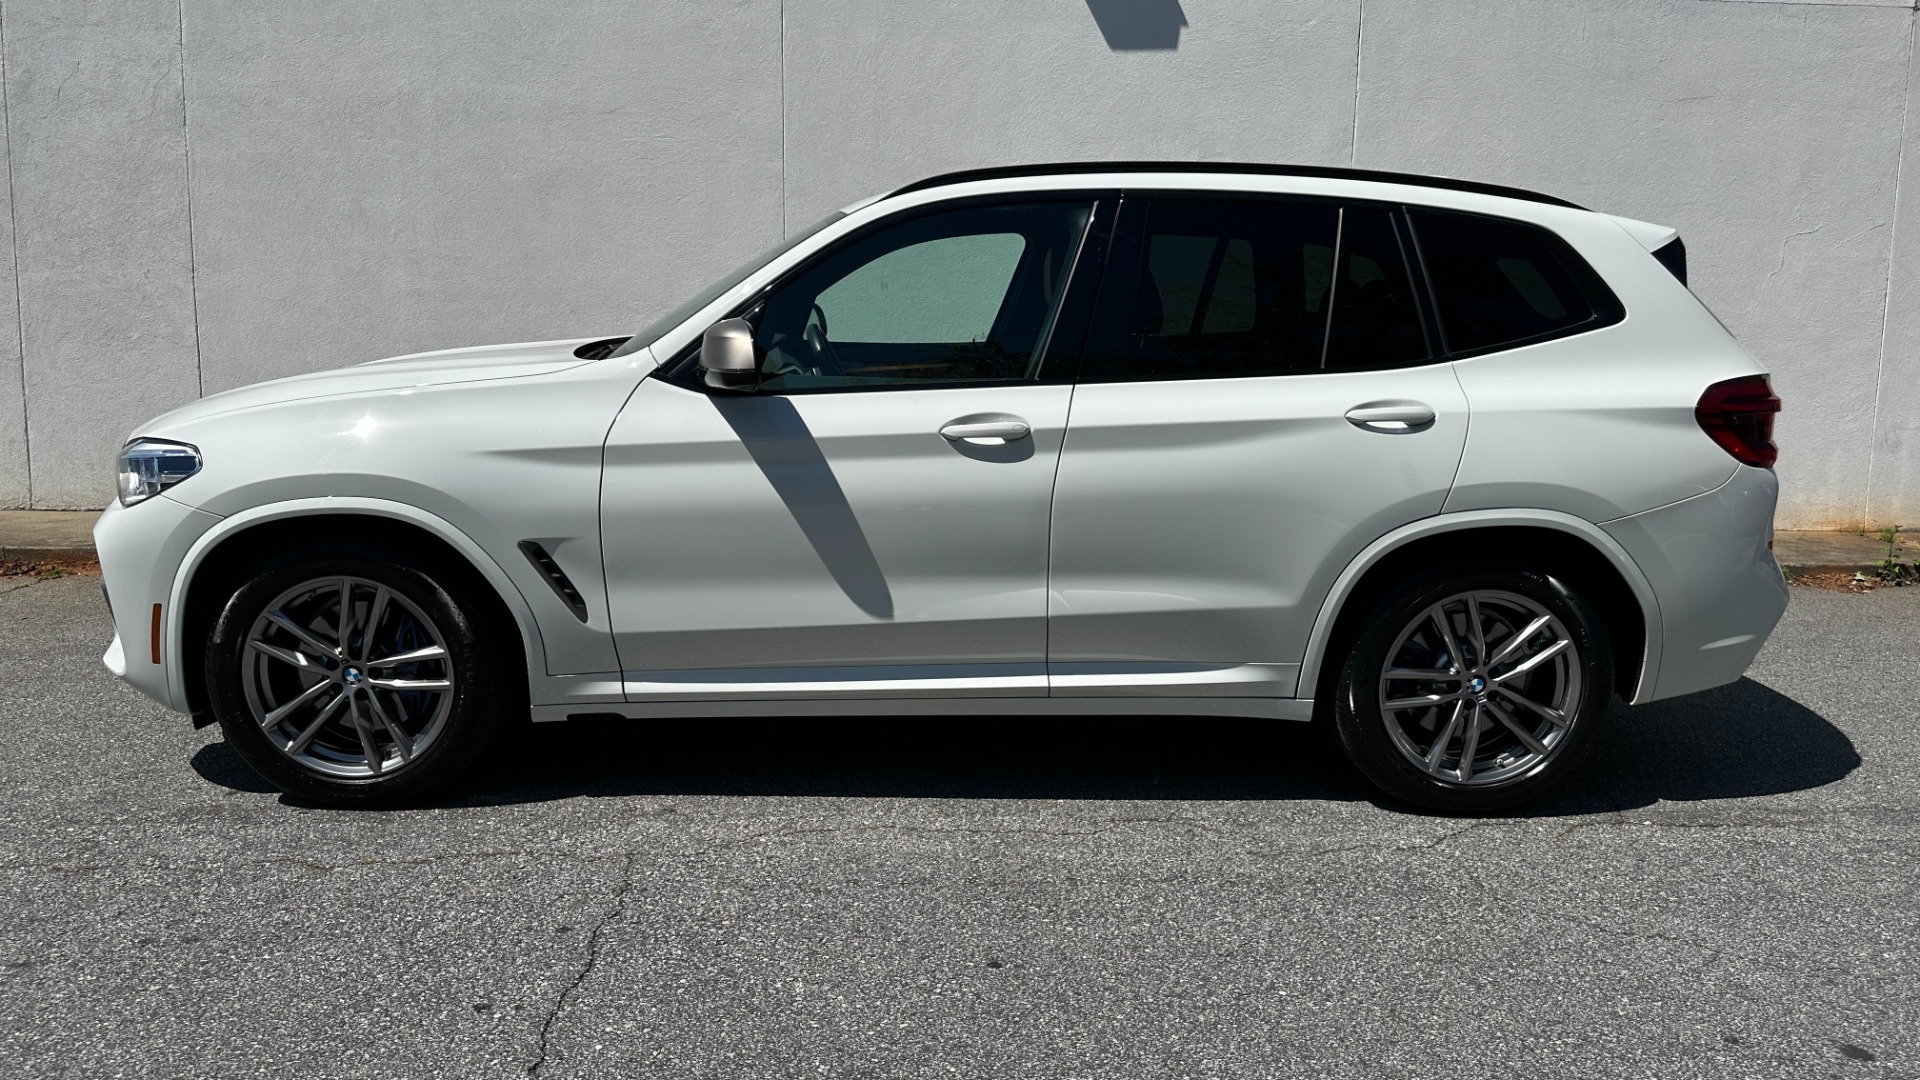 Used 2021 BMW X3 M40i / TRAILER HITCH / REAR VIEW CAMERA / STORAGE PKG / GALVANIC CONTROLS for sale $50,495 at Formula Imports in Charlotte NC 28227 3